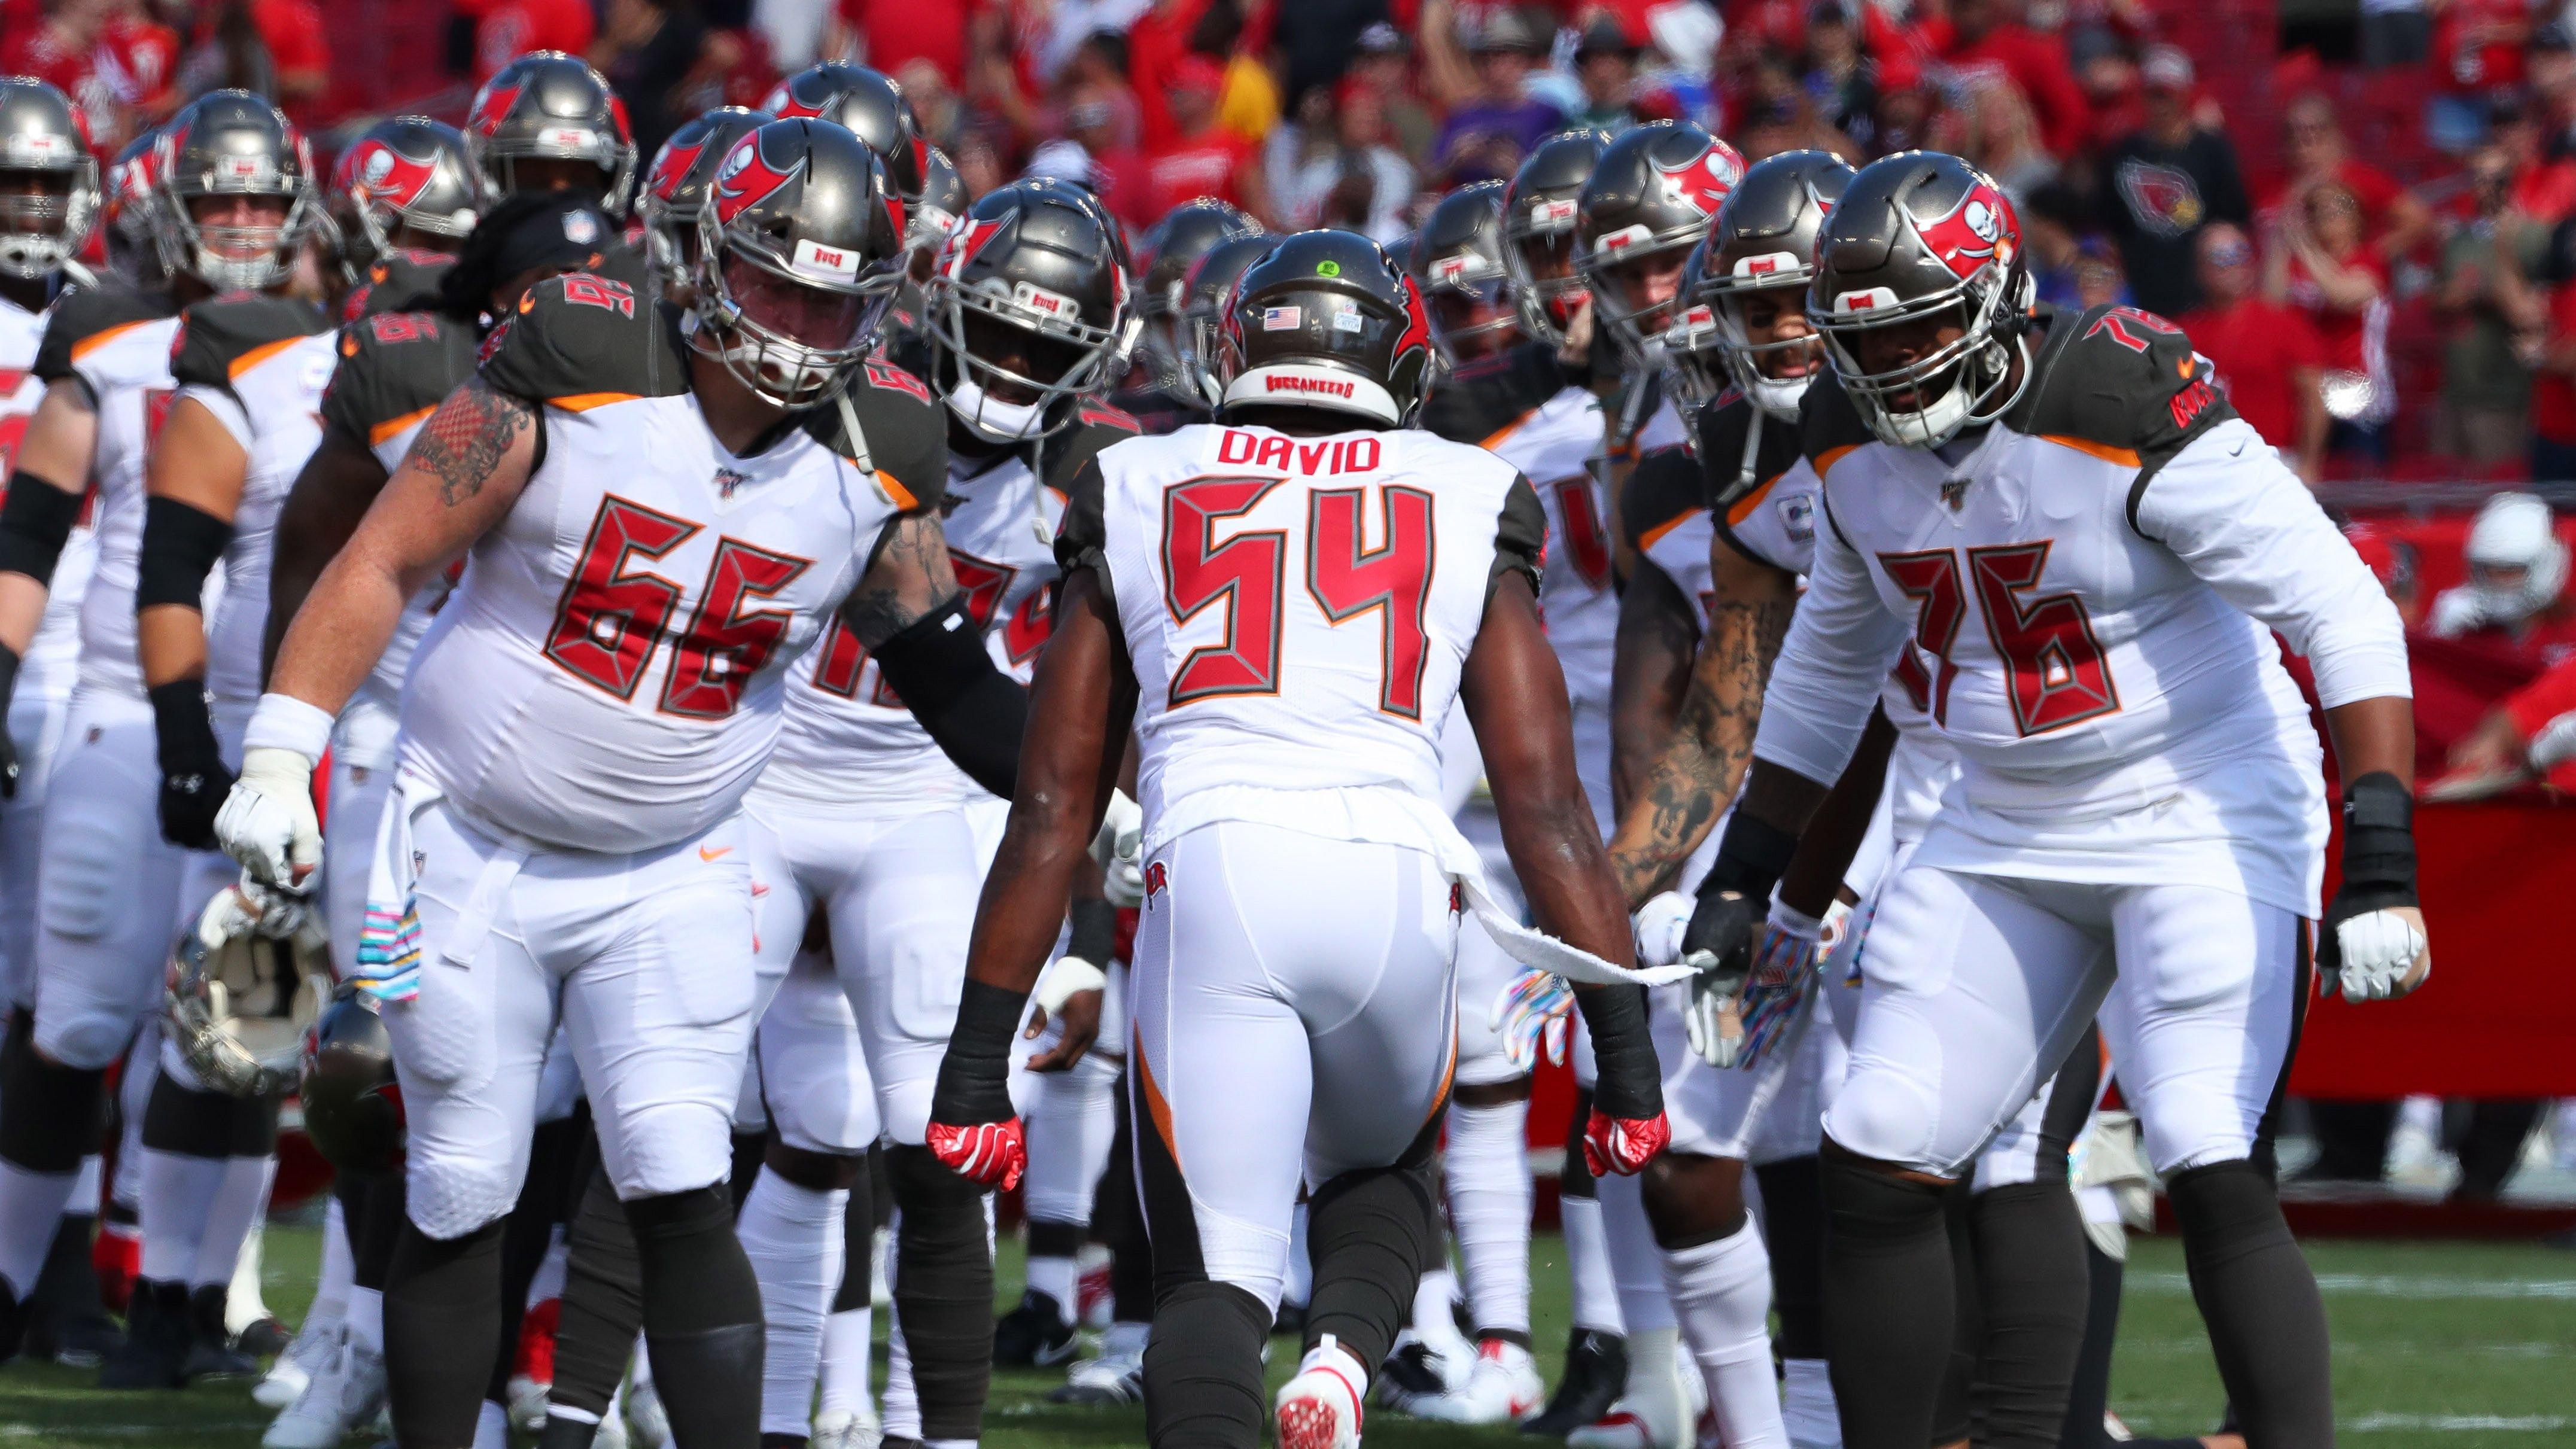 Tampa Bay Buccaneers lined up on field